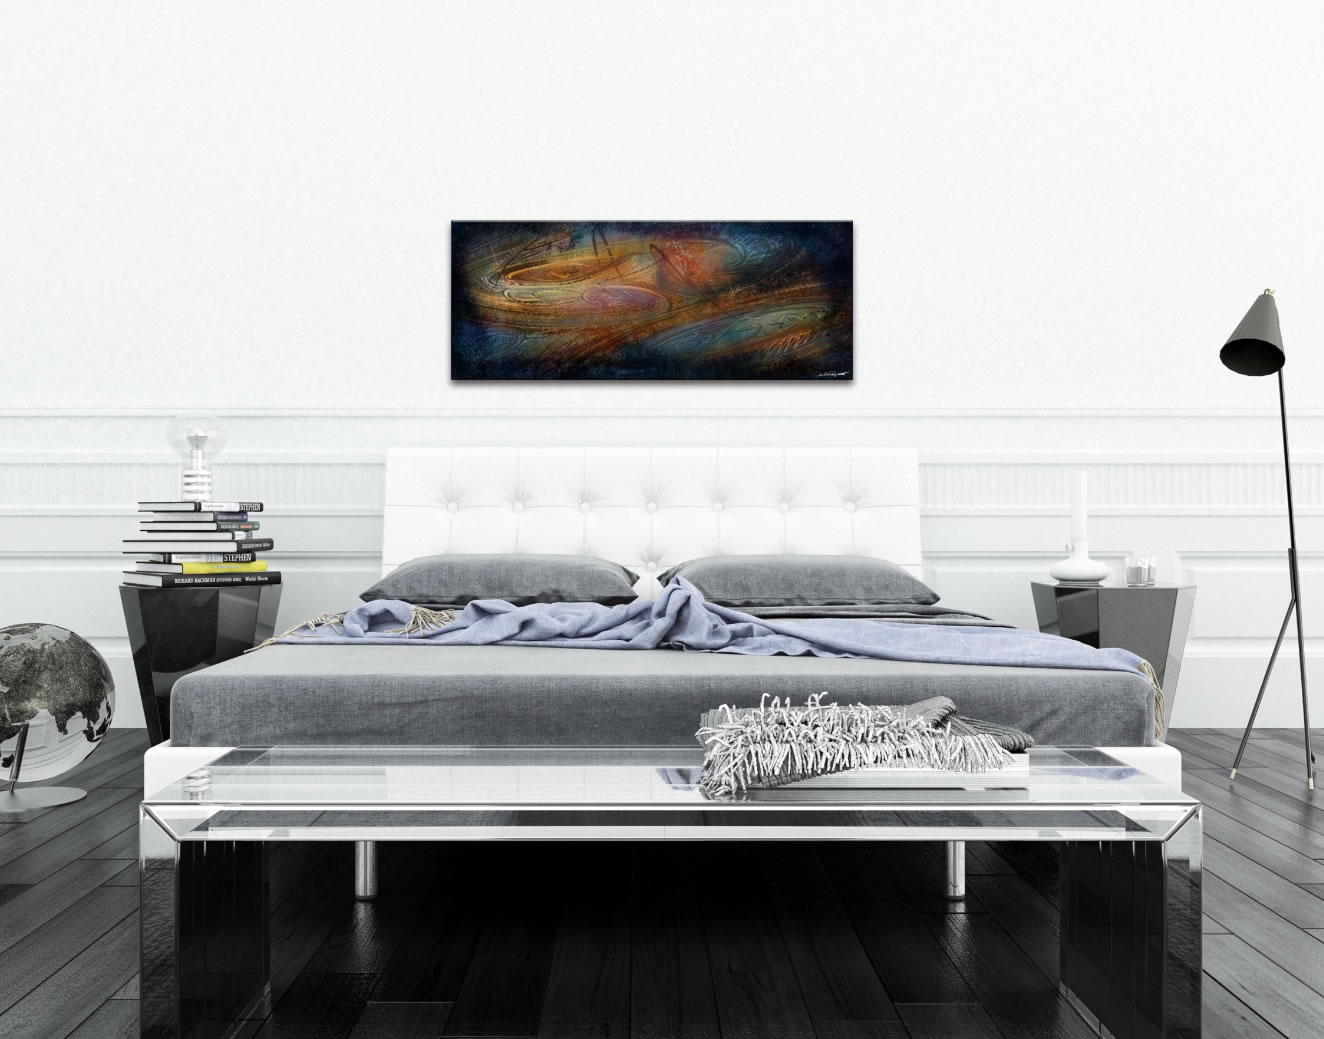 Northern Lights - Contemporary Metal Wall Art - Lifestyle Image